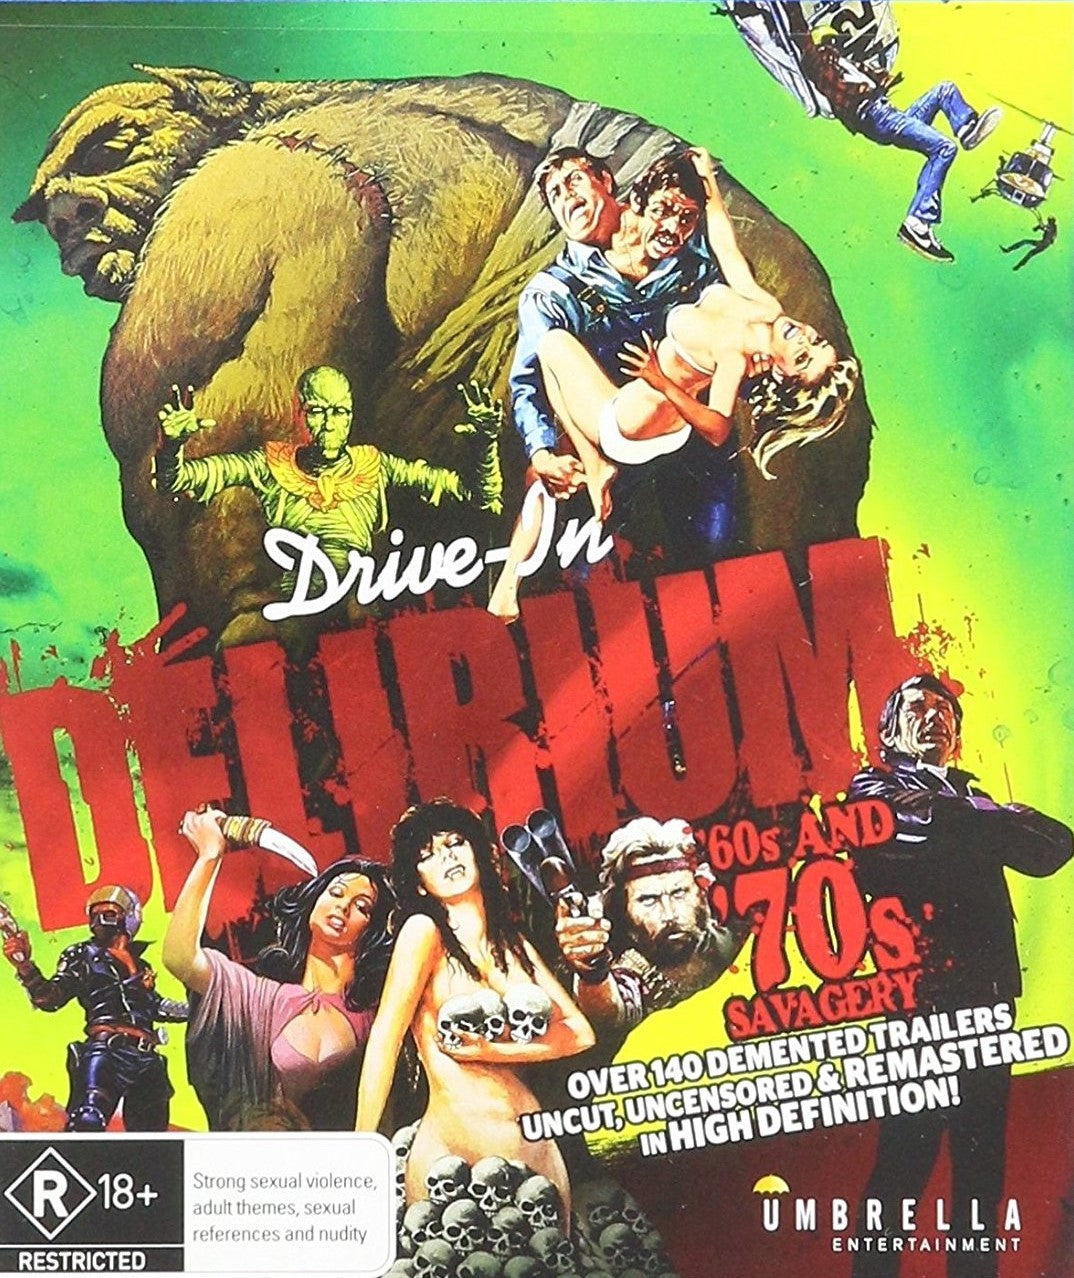 Drive In Delirium: 60S And 70S Savagery (Region Free Import) Blu-Ray Blu-Ray